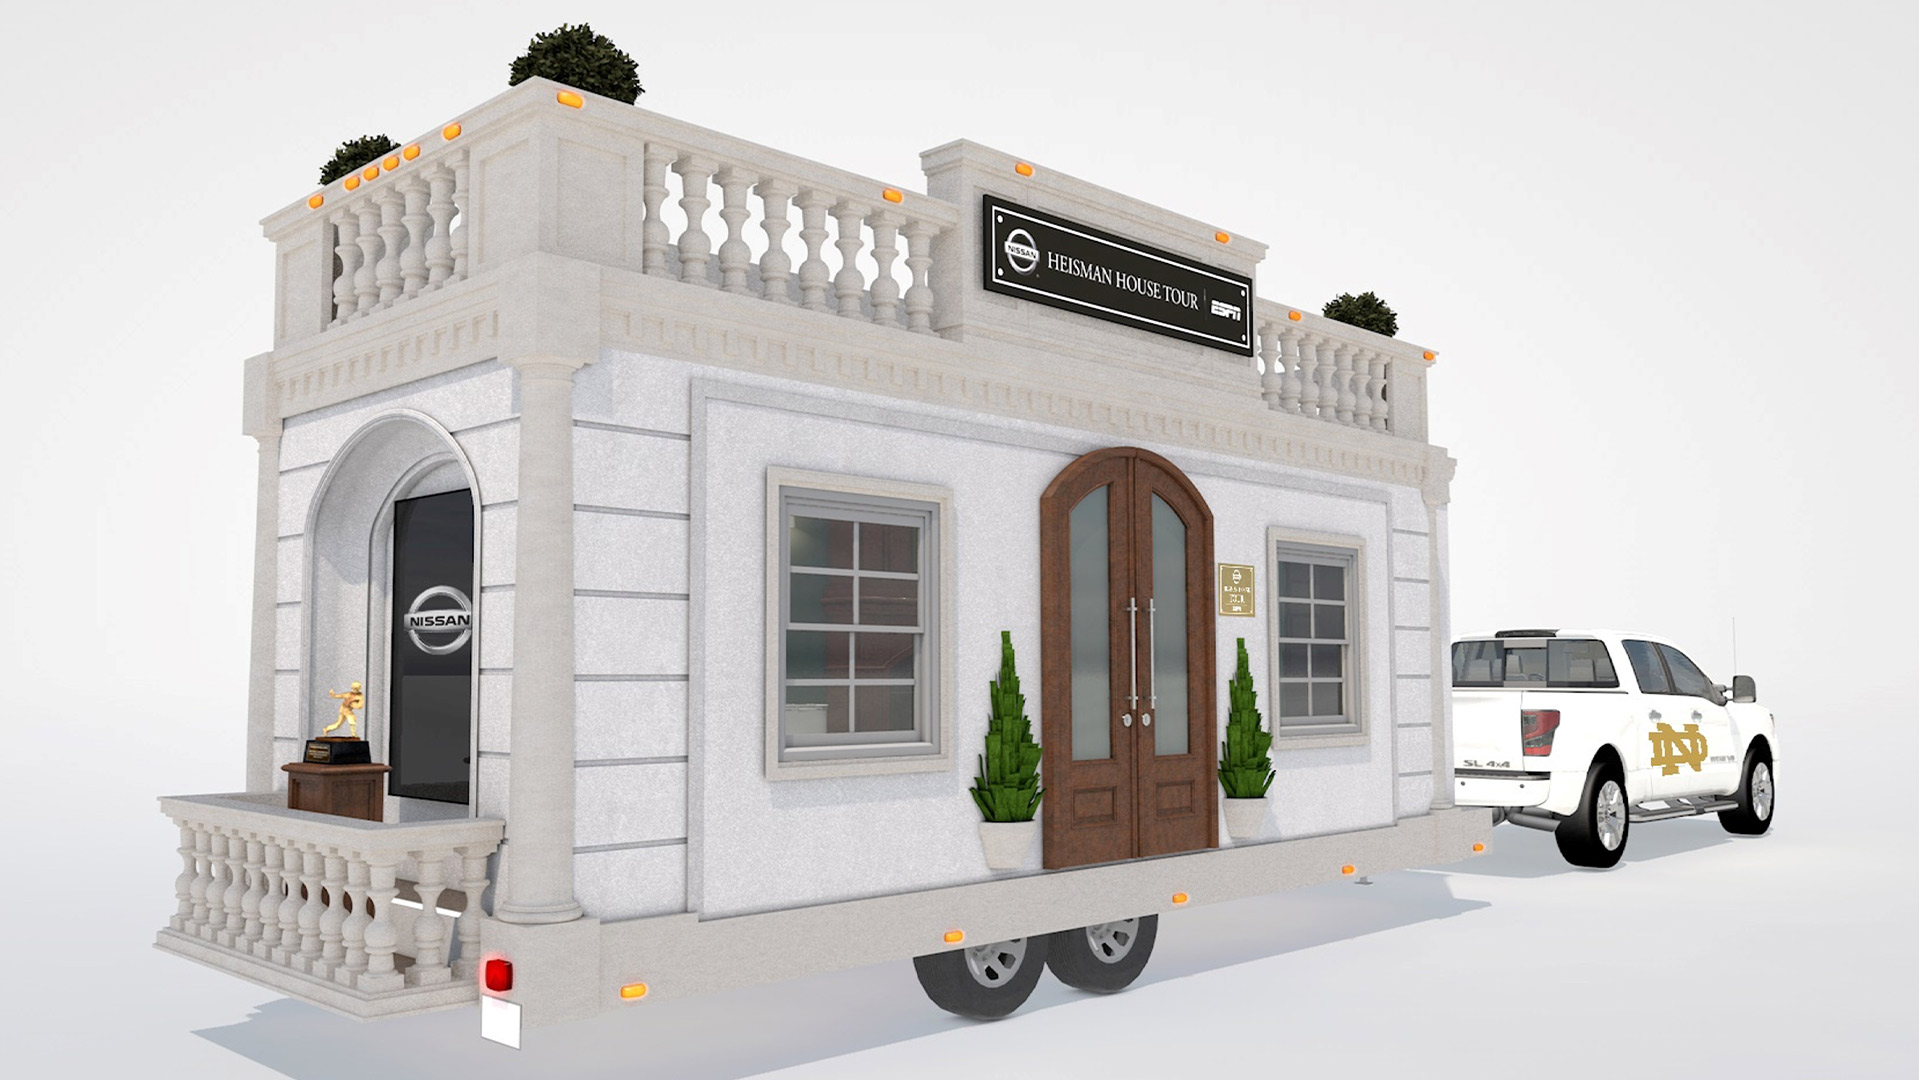 Rendering of the Nissan Heisman House on a trailer bed pulled by a pickup truck